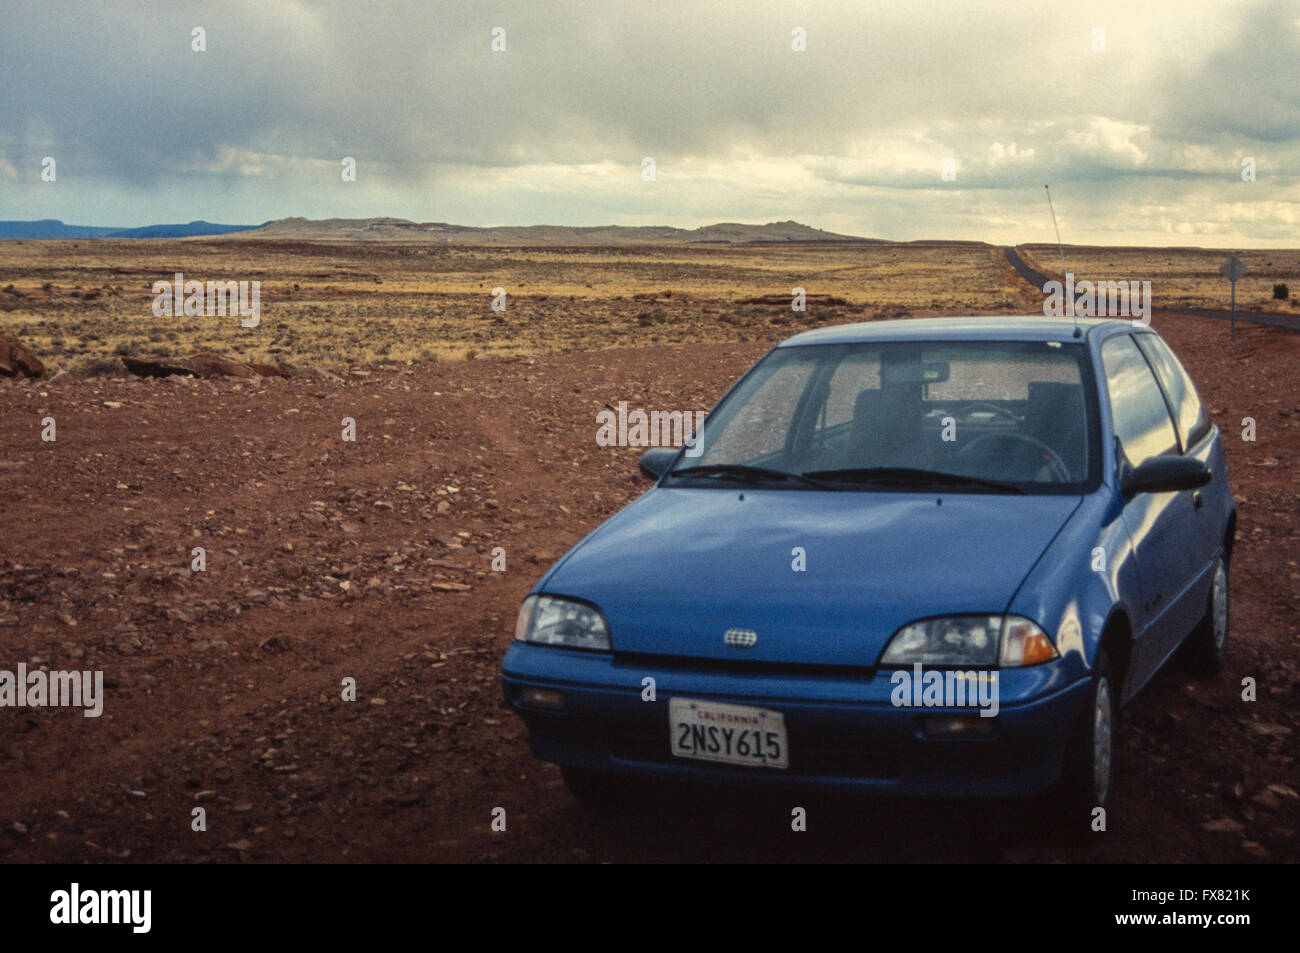 Archive image of a metallic blue 1990 model Geo Metro 3-door subcompact hatchback car parked at Meteor Crater, Arizona, USA, 1990 Stock Photo